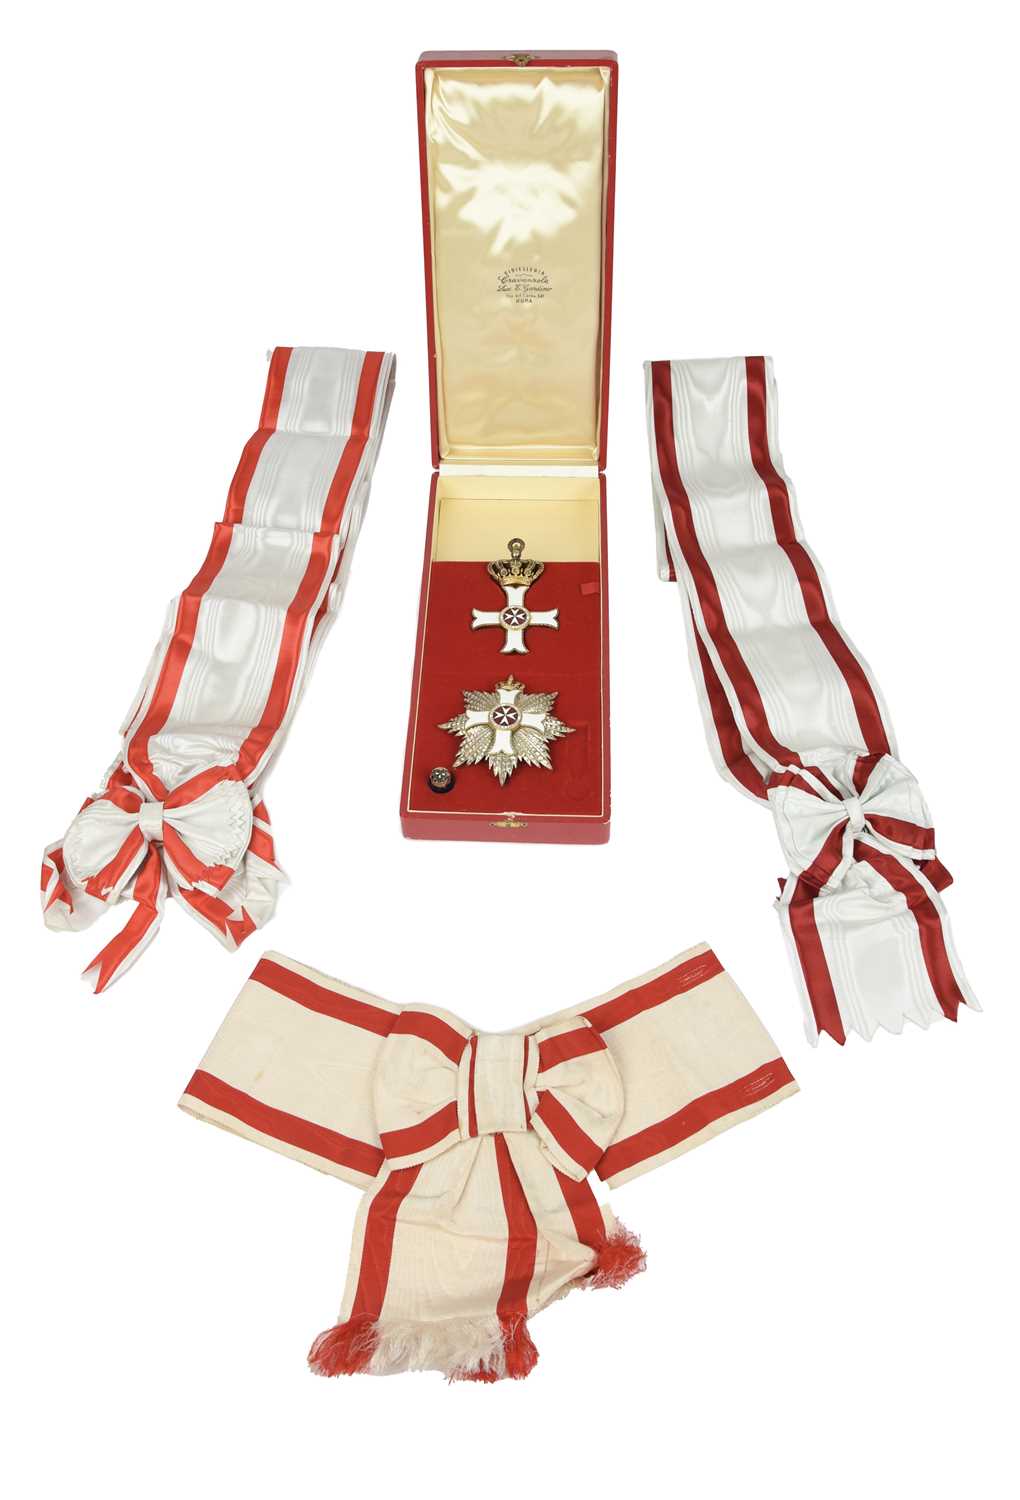 The Order of Merit of the Sovereign Military Order of Malta: a cased set of insignia, silver,